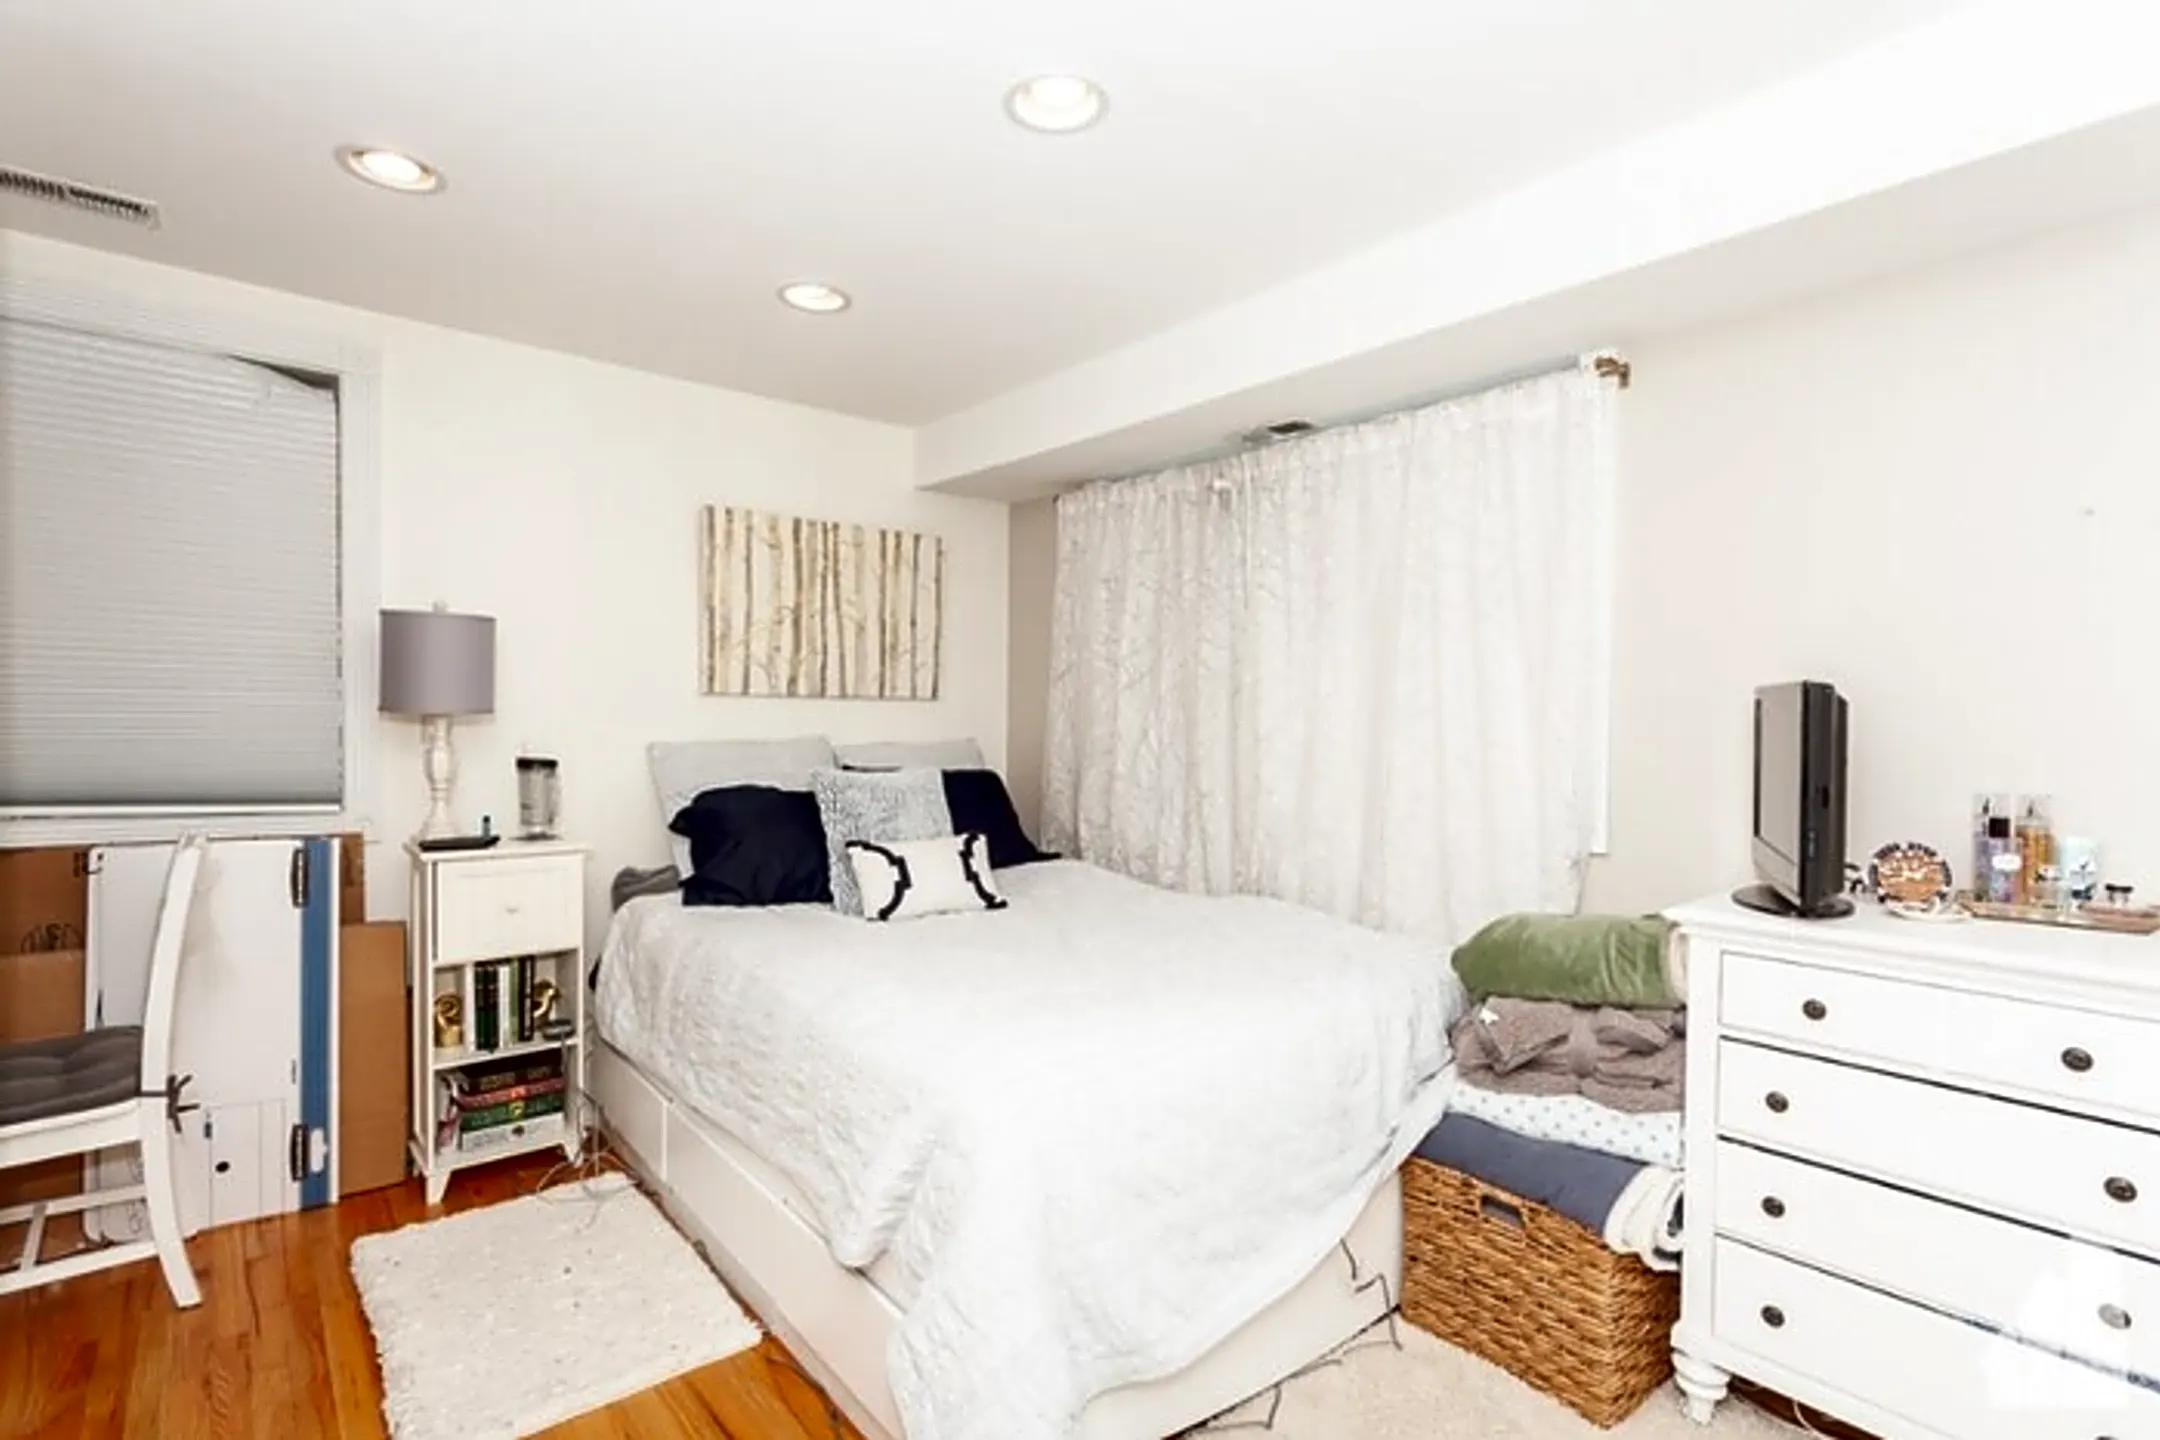 Bedroom - 1433 W Oakdale Ave - Chicago, IL